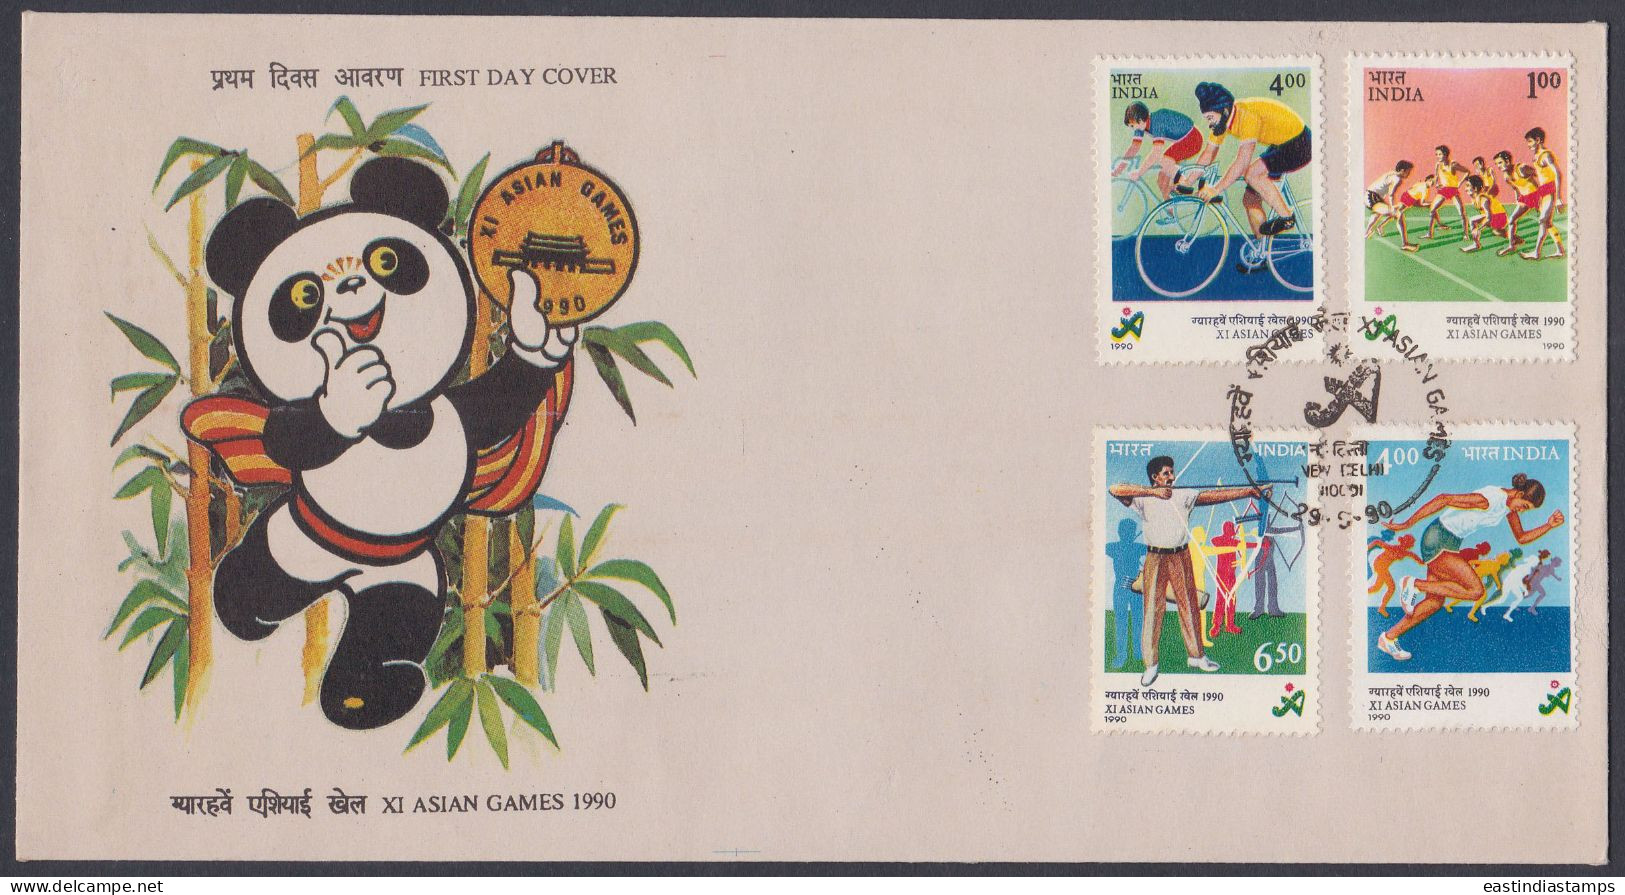 Inde India 1990 FDC Asian Games, Panda, Cycling, Cycle, Archery, Kabaddi, Athletics, Sport, Sports, First Day Cover - Covers & Documents